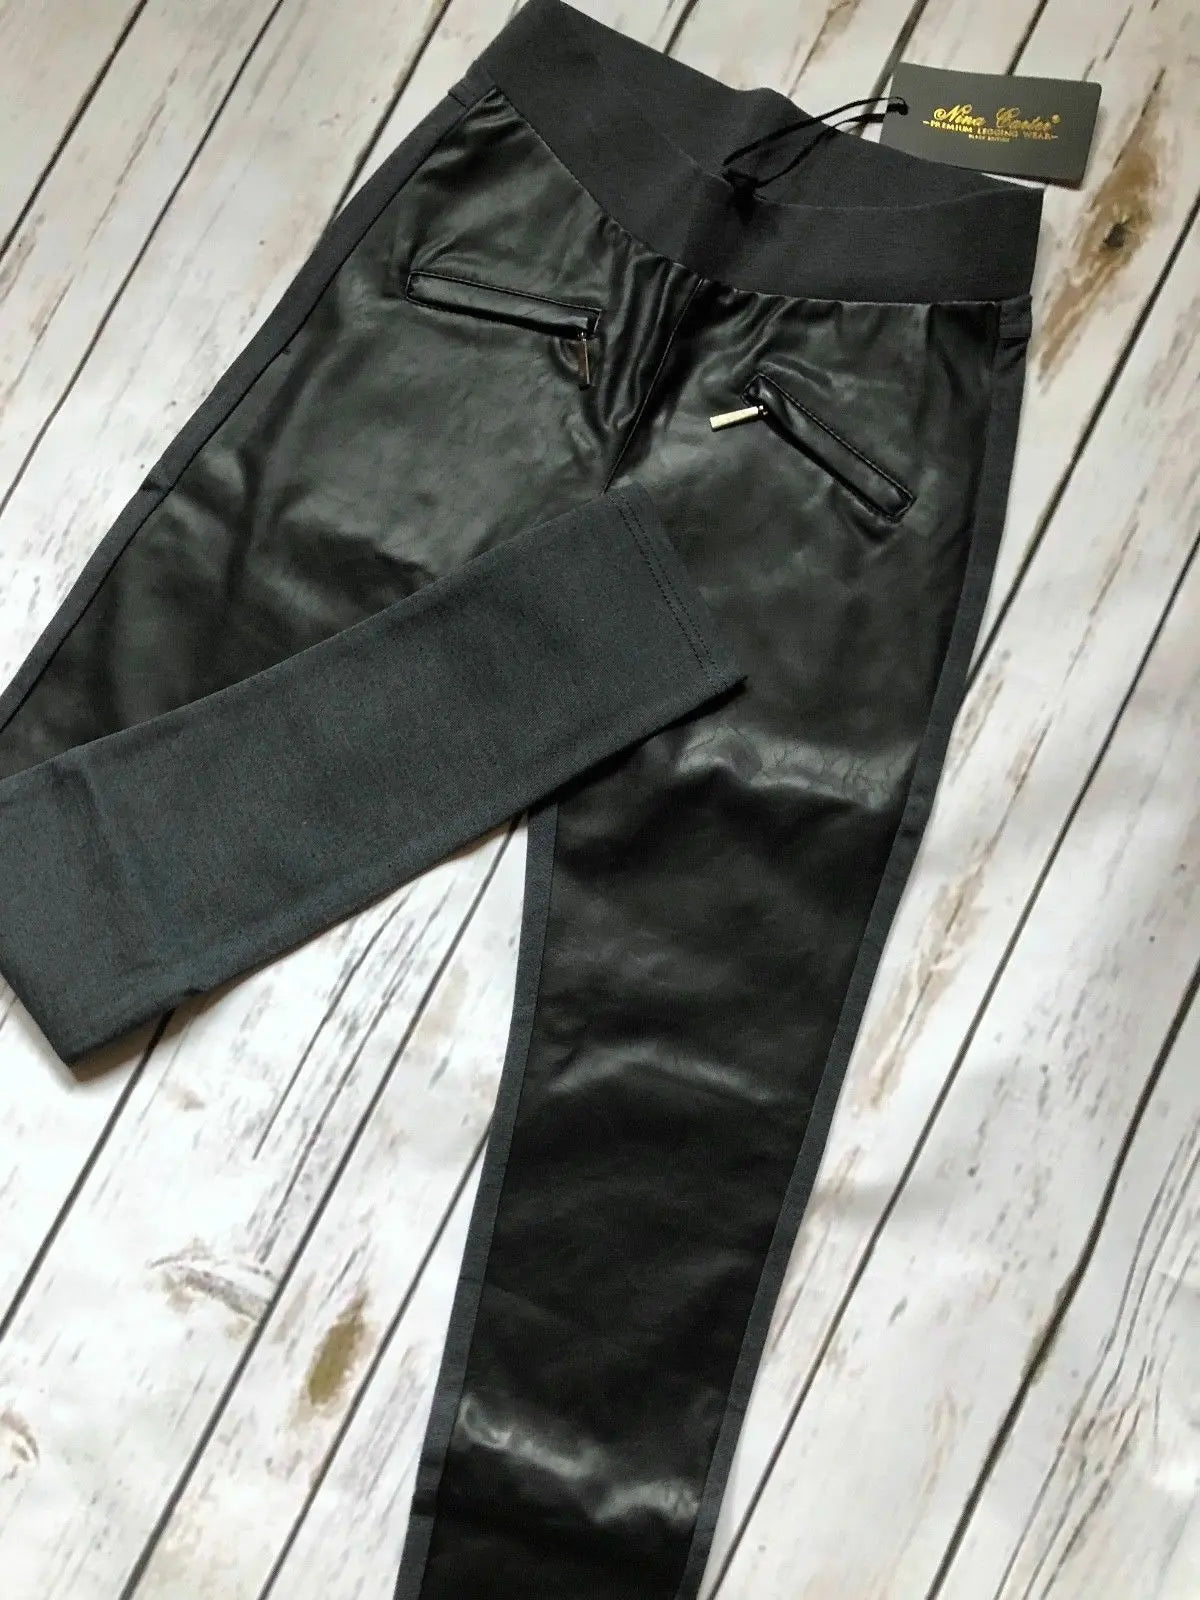 PUNK/ROCK/ STRETCH Ladies Leather-LOOK Front Quality Trousers/Leggings SIZE 8-14 Nina Carter